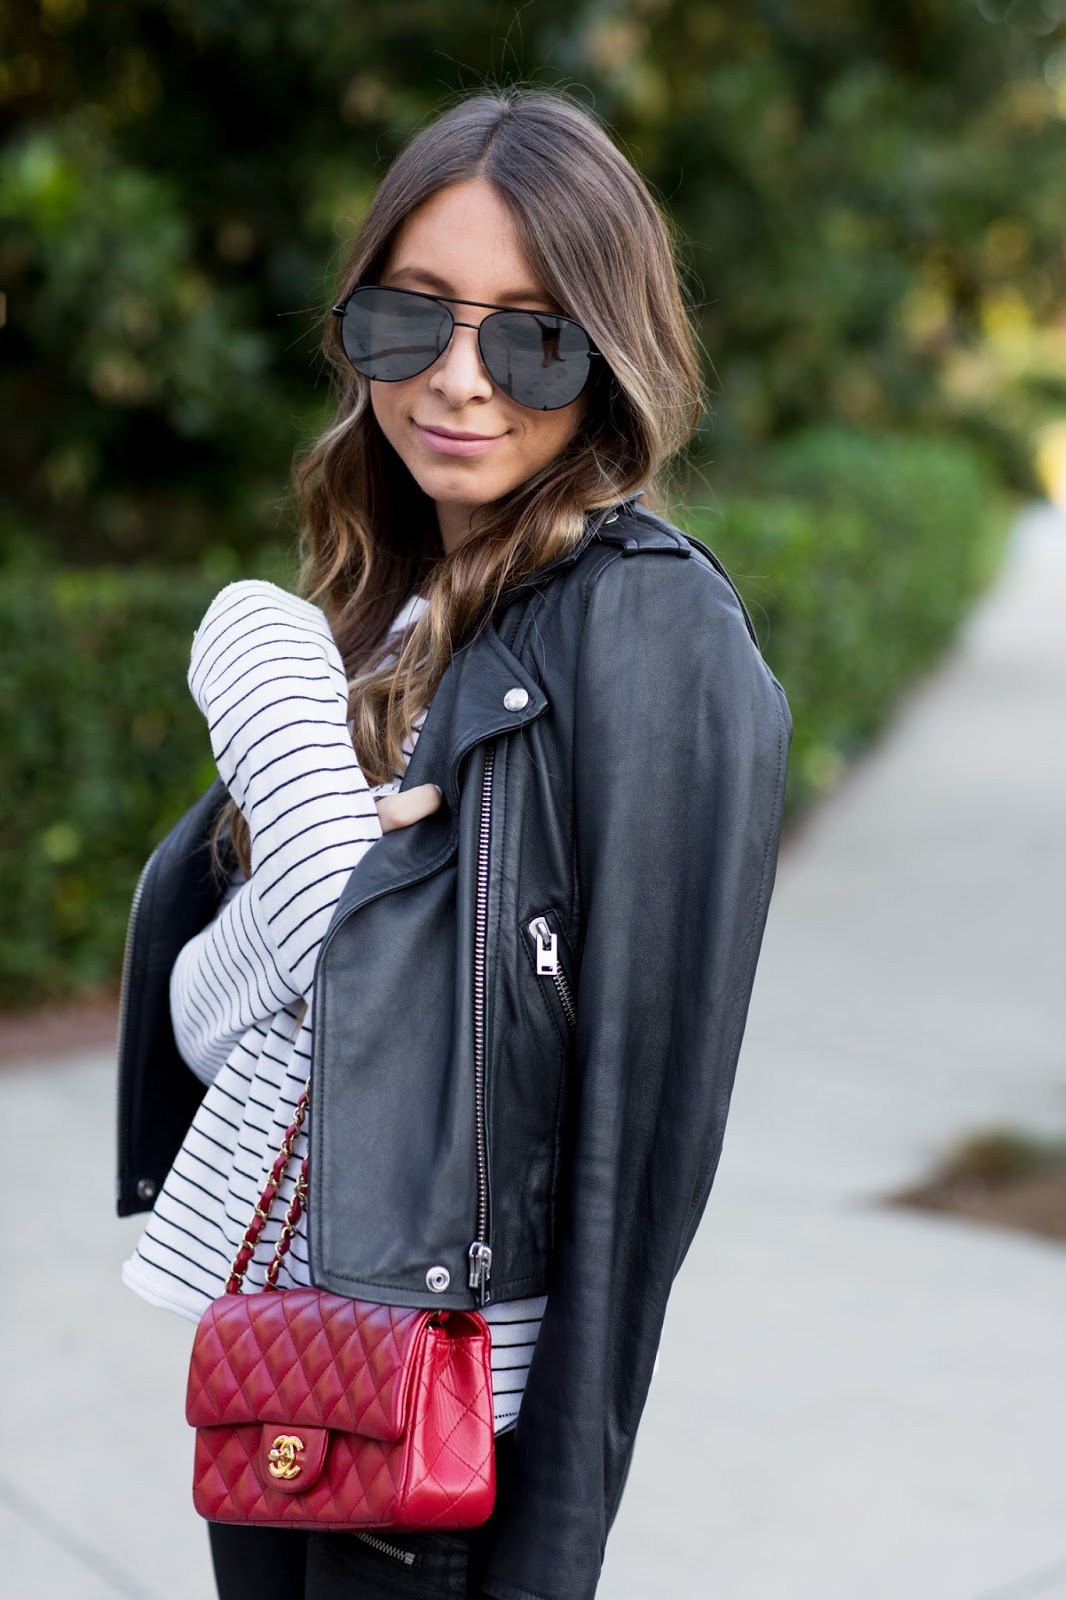 She Went West: Leather & Stripes